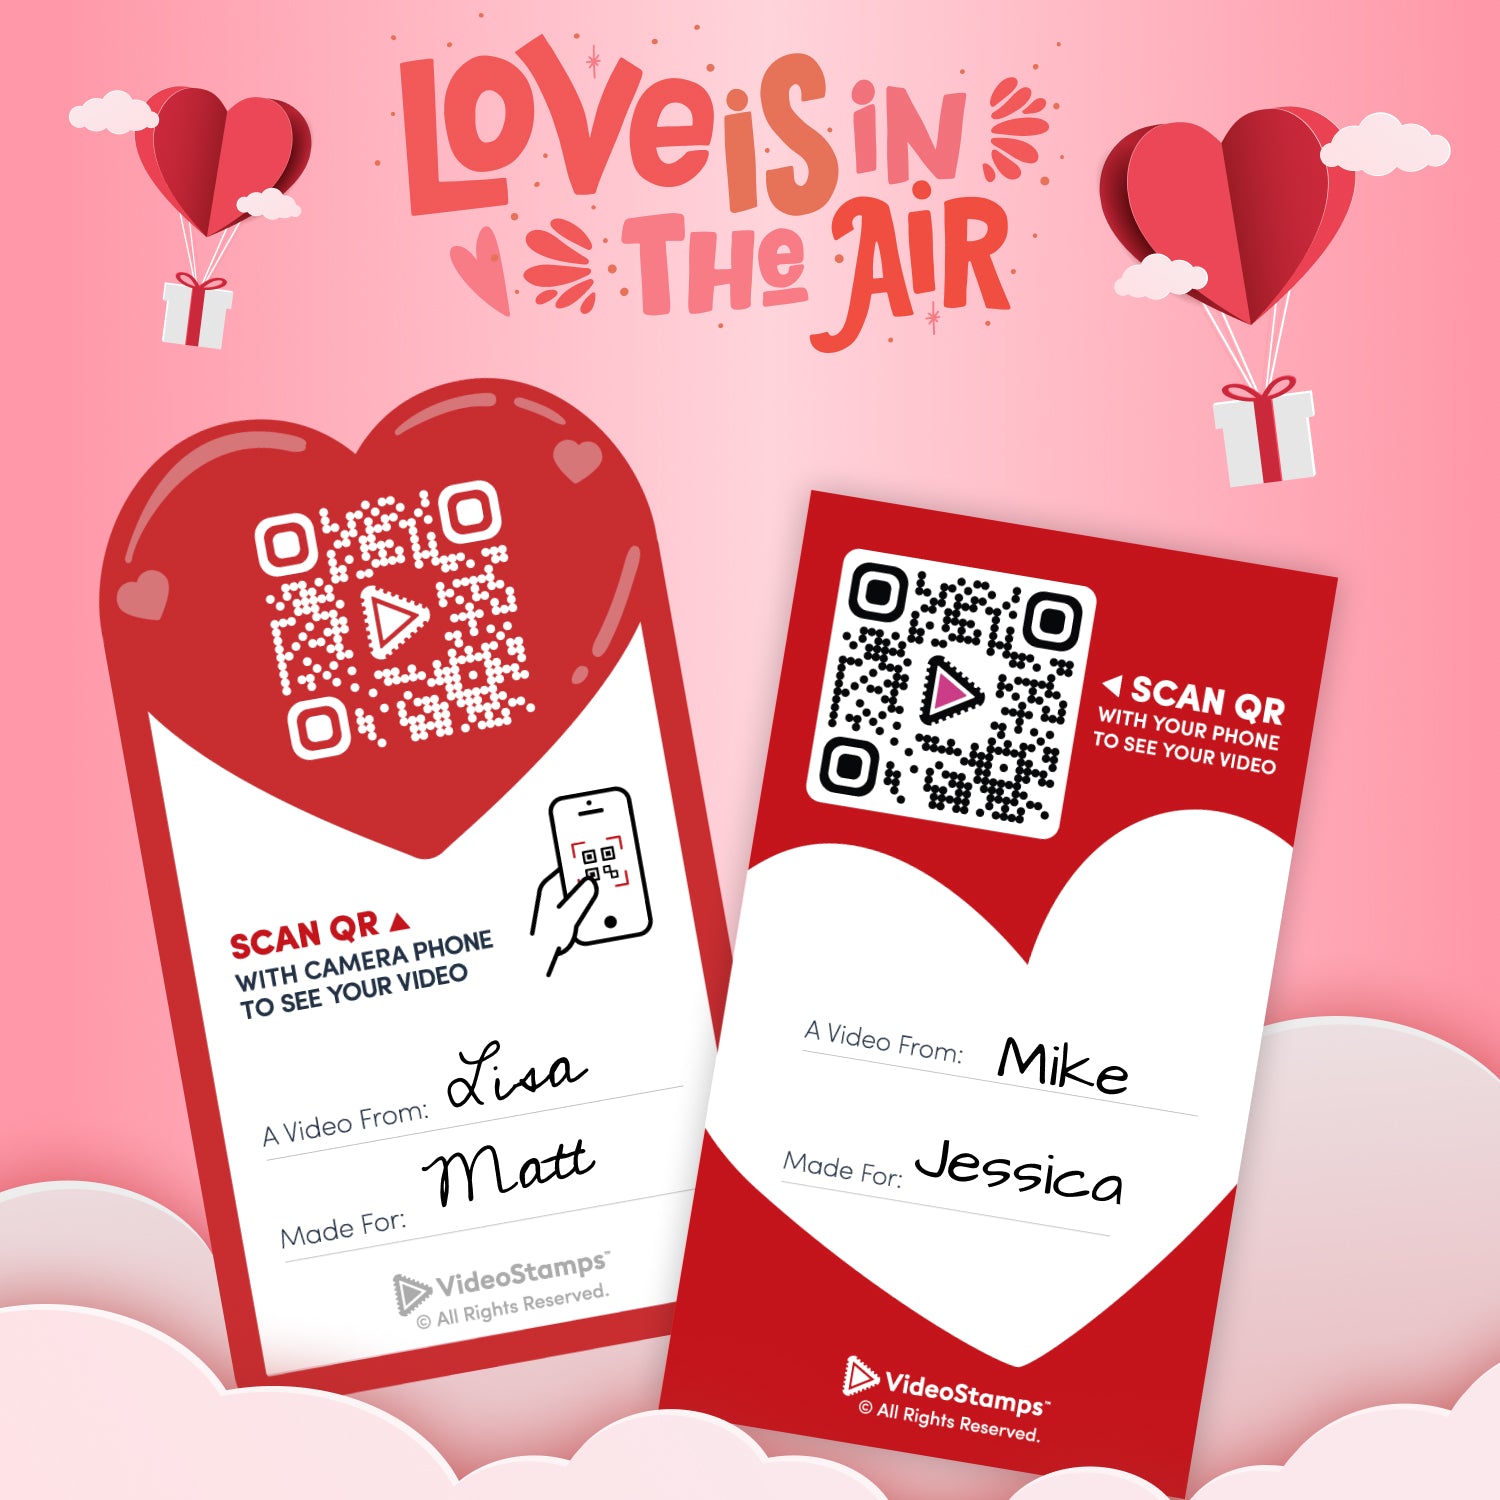 Get Two Free Valentine's VideoStamps